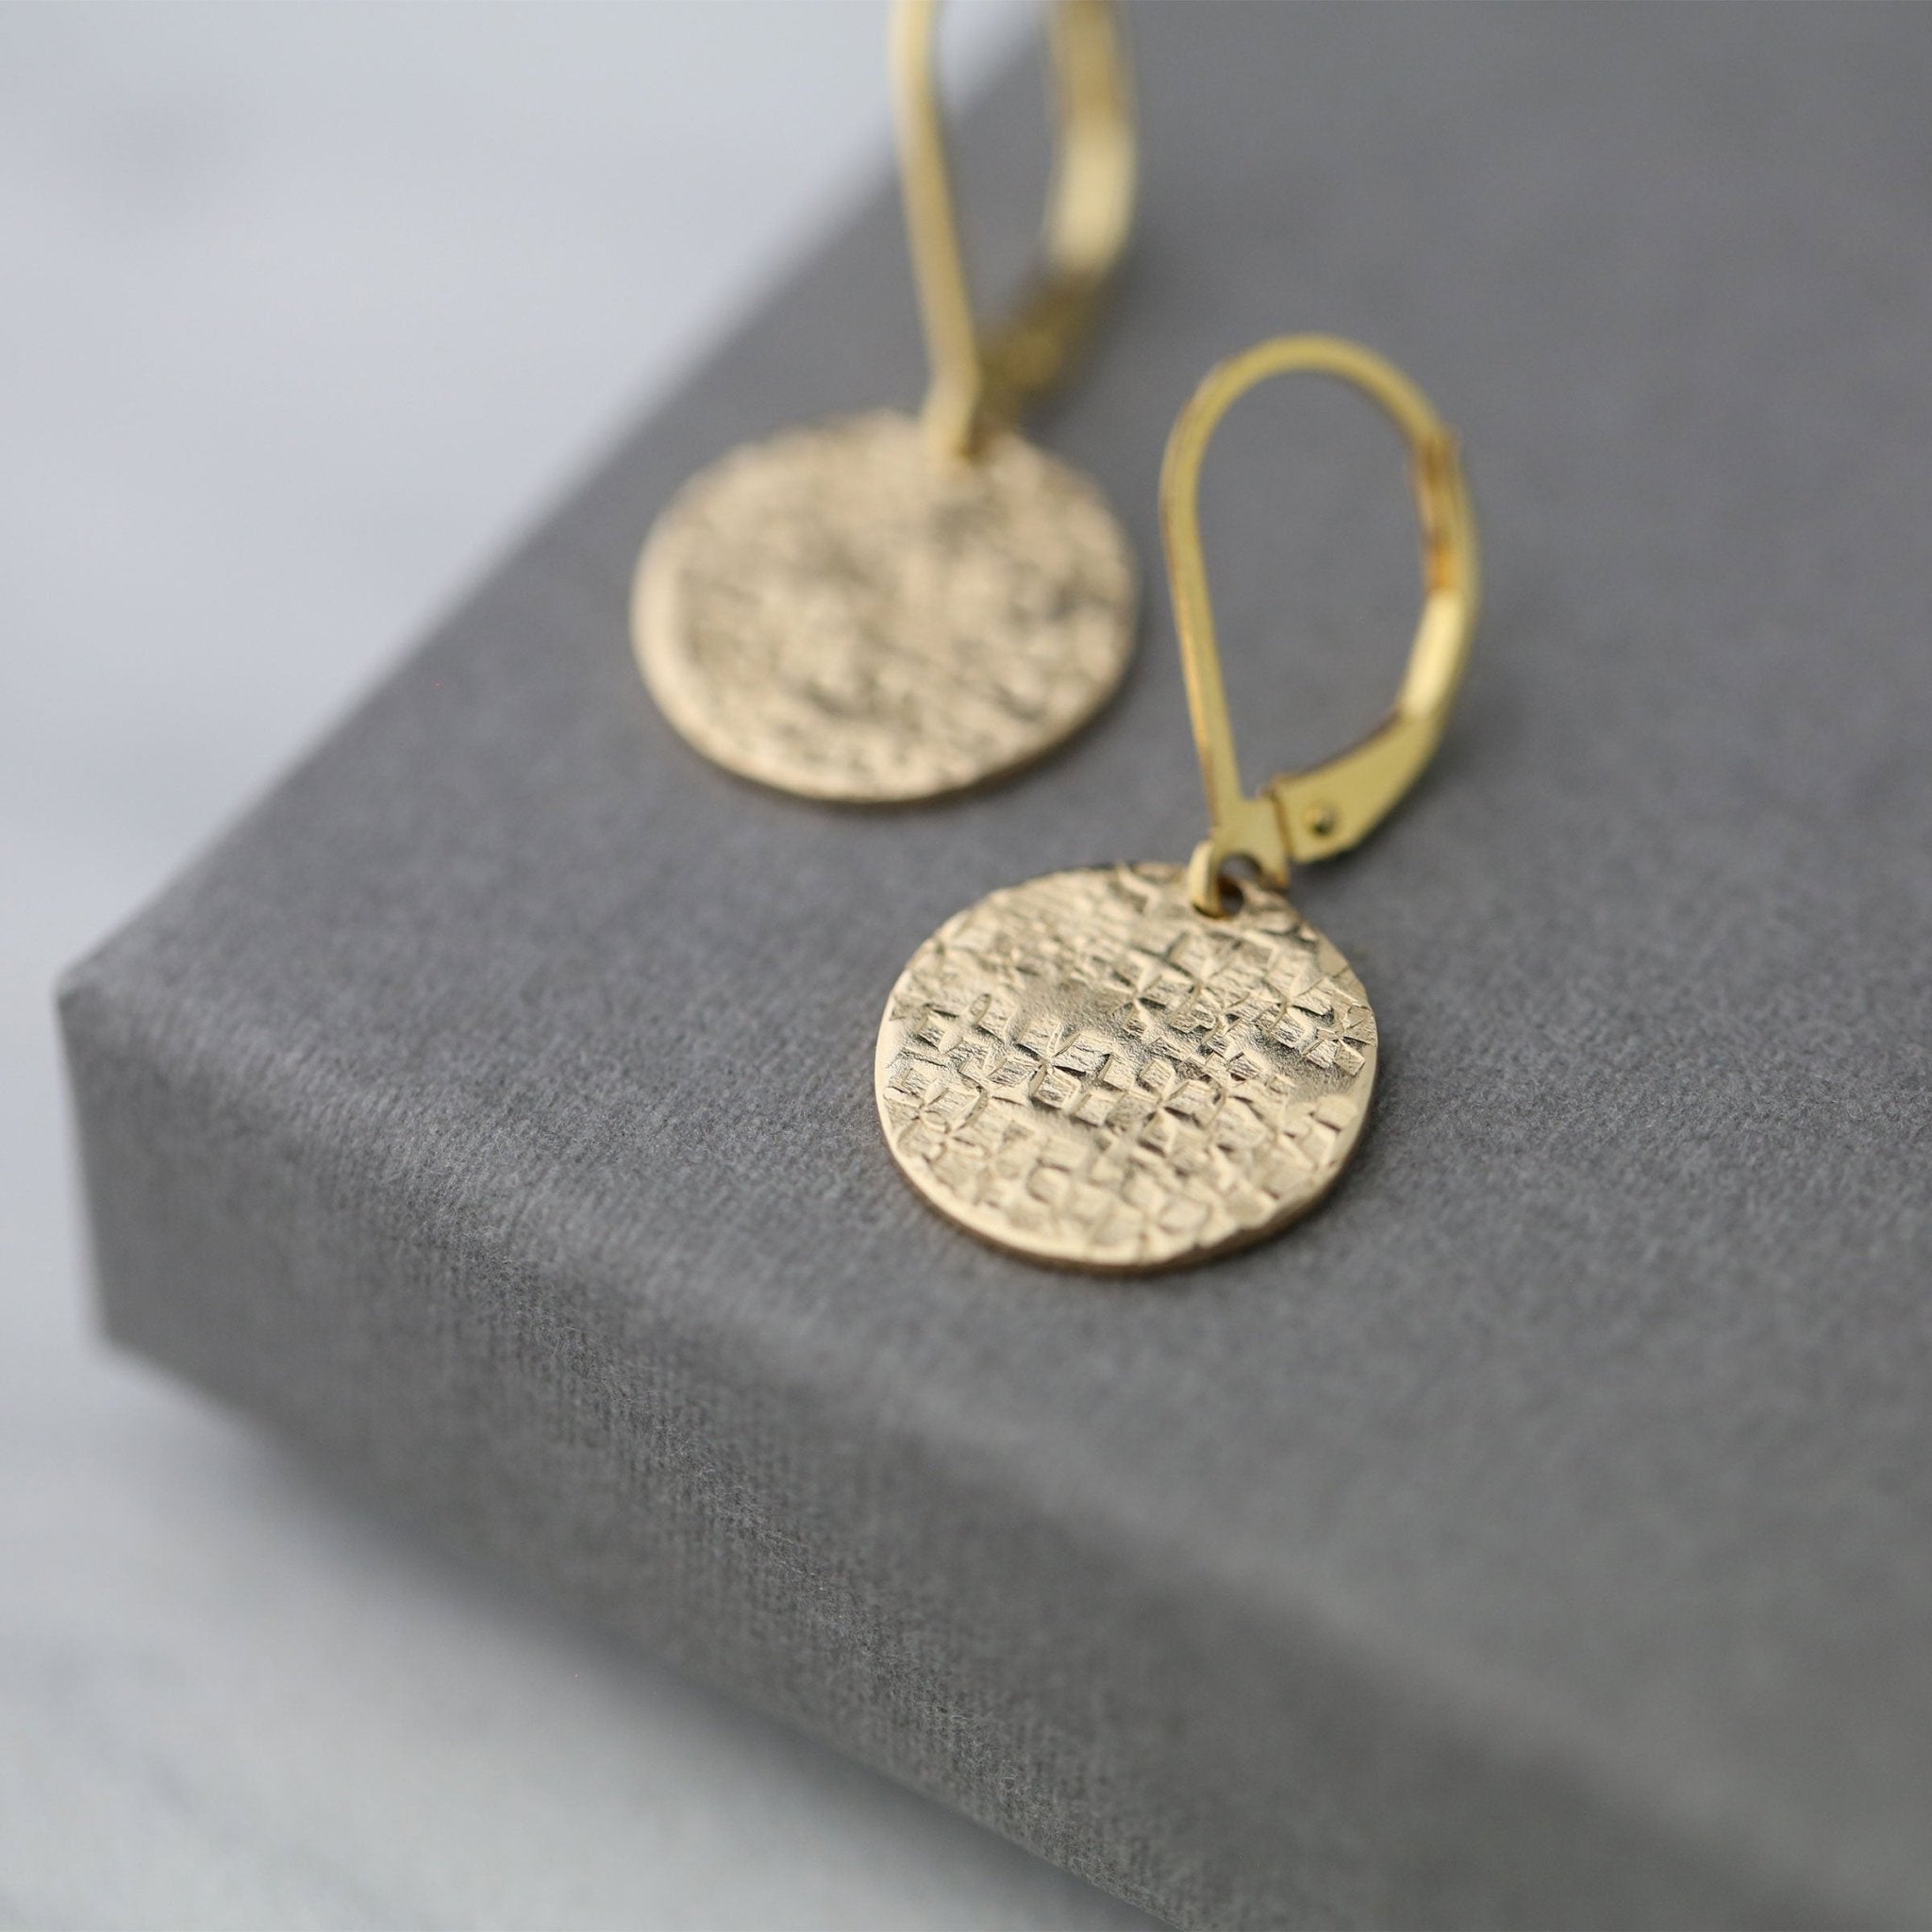 Gold Raw Silk Texture Lever-back Earrings